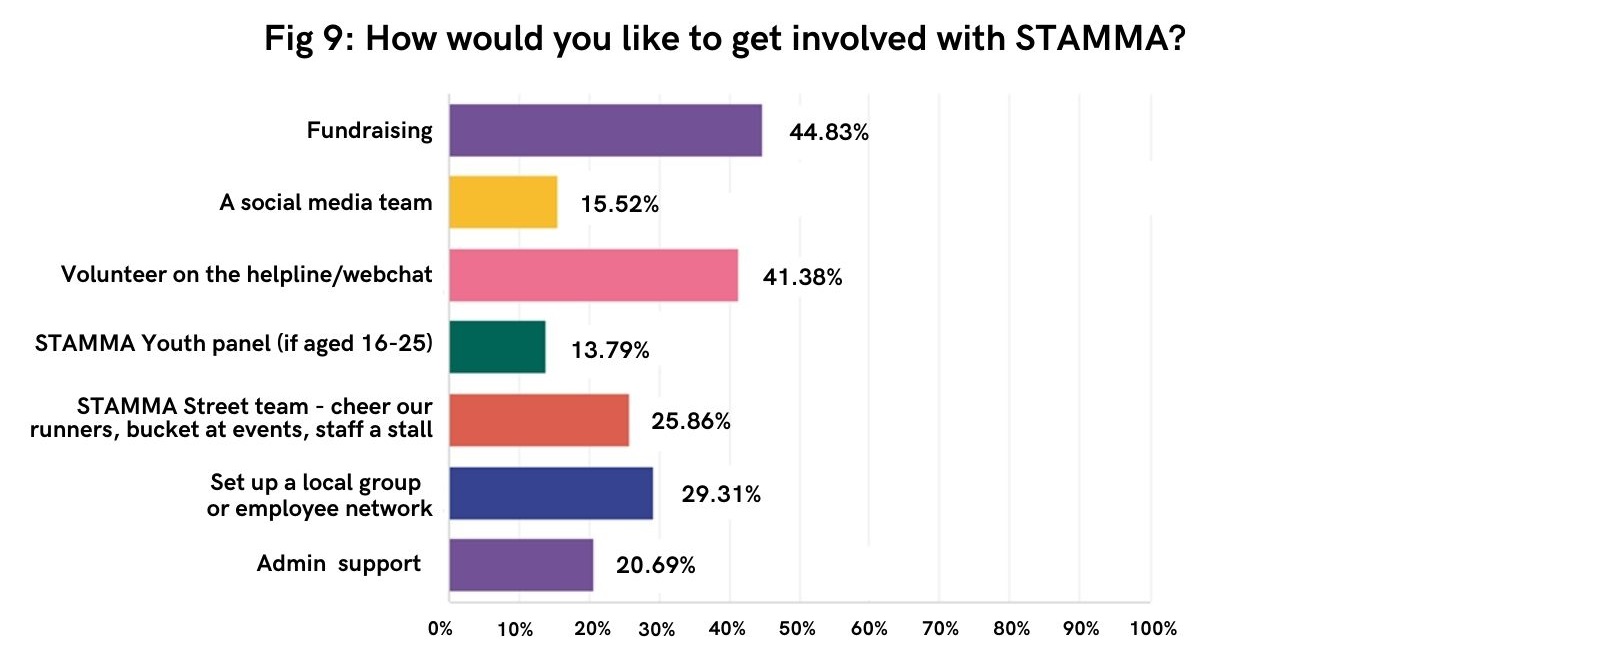 A bar graph showing what activities survey respondents would like to get involved with